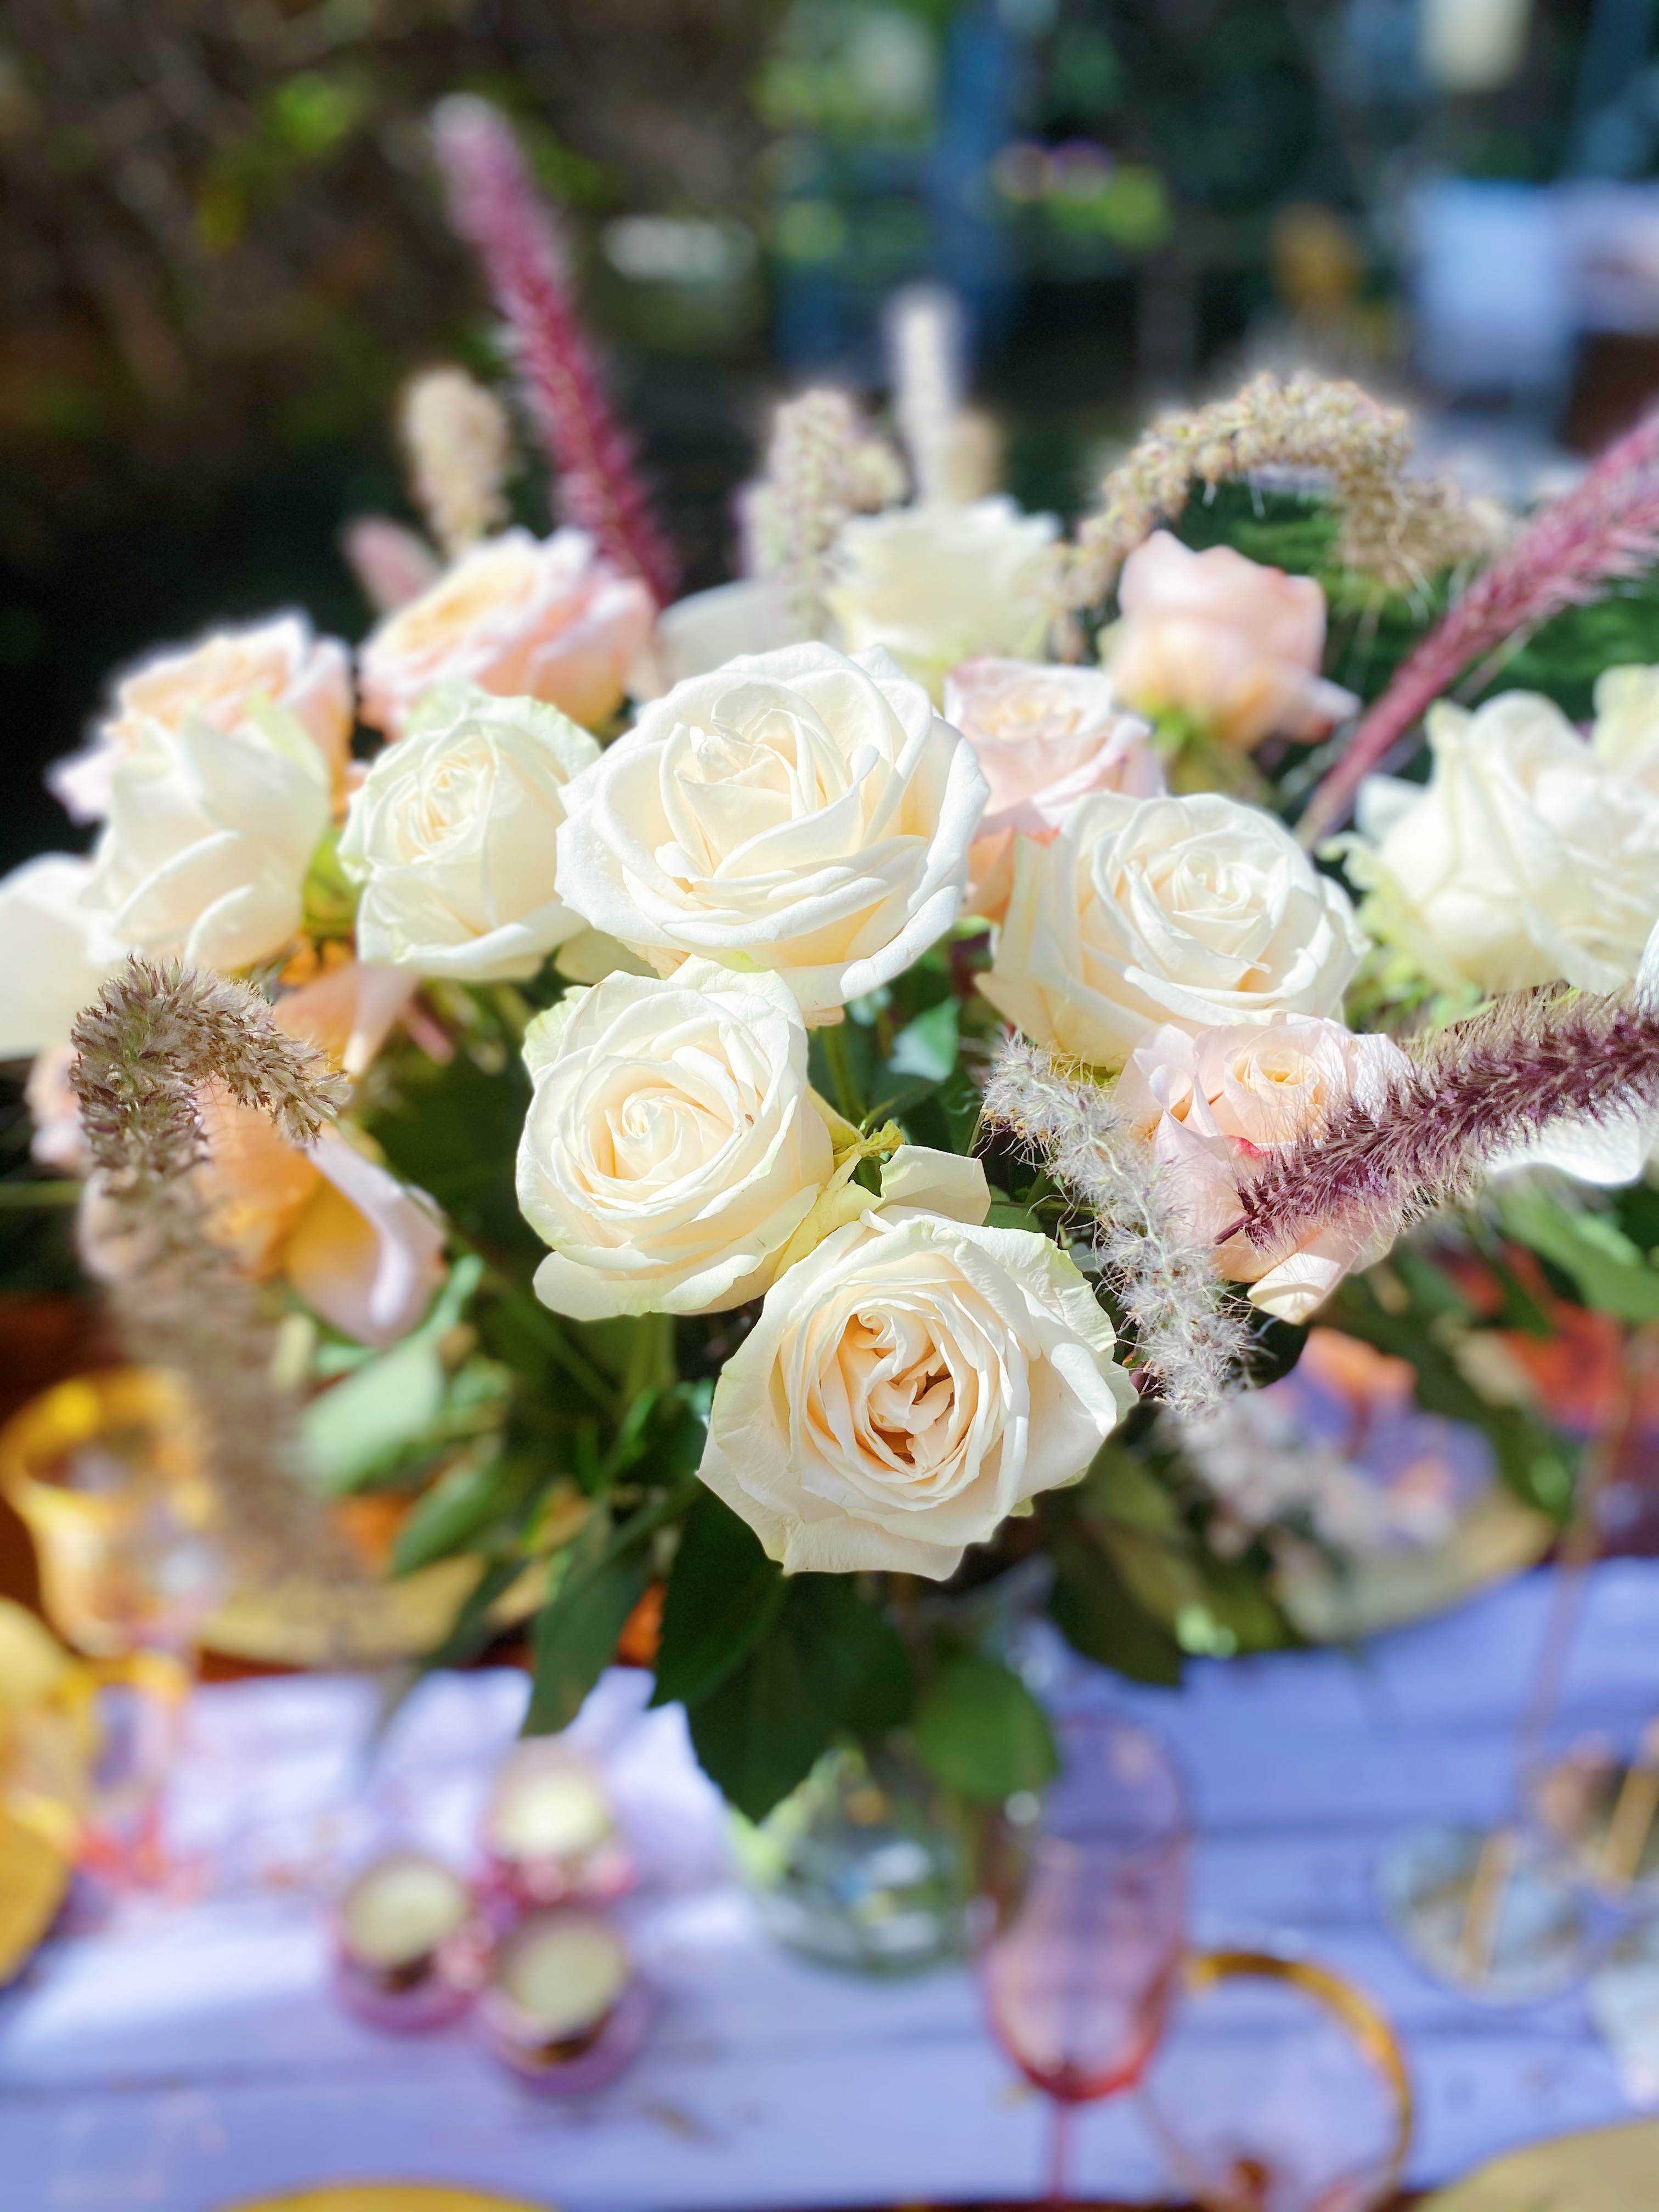 White roses in a vase in focus, with candles and pink champagne glasses in the background